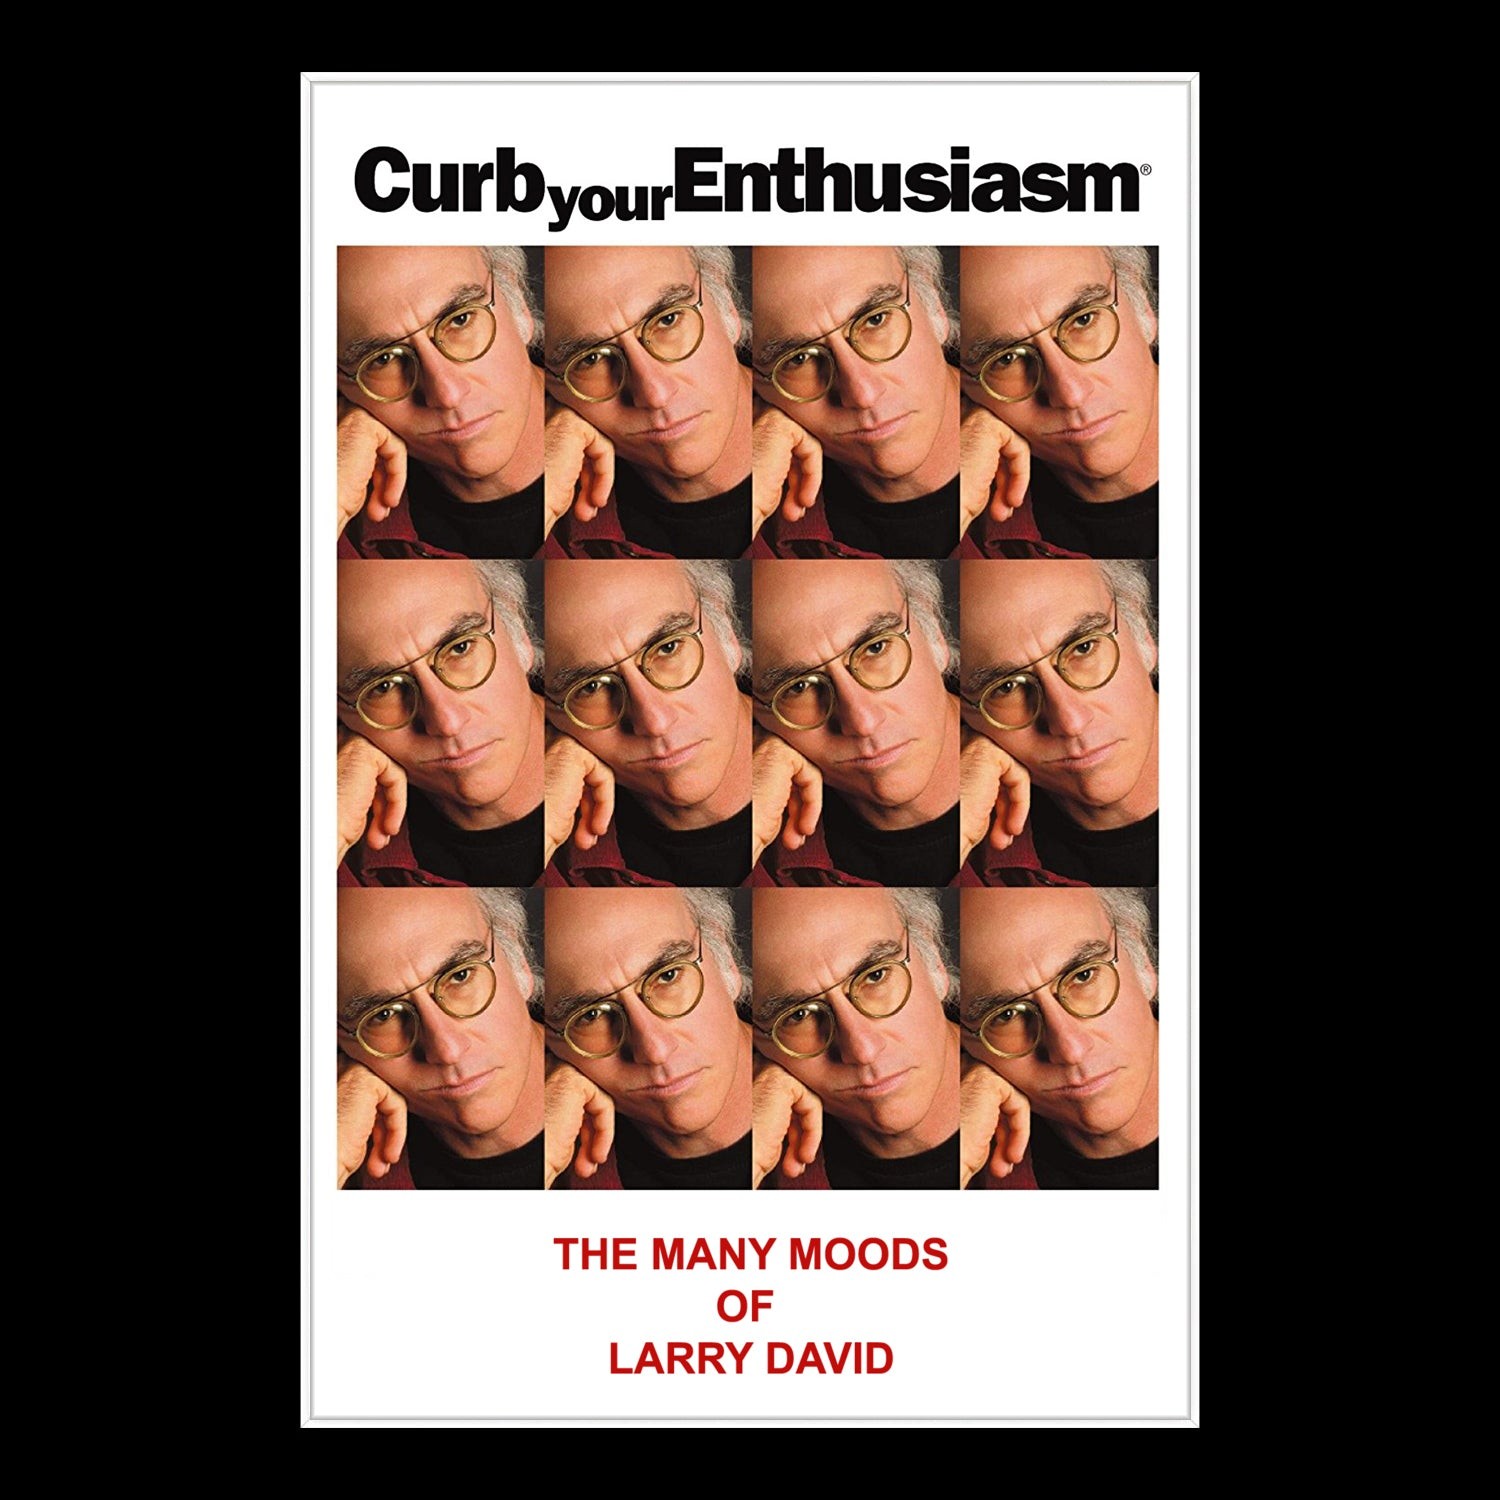  HWC Trading Curb Your Enthusiasm Larry David 16 x 12 inch  Framed Gifts Printed Signed Autograph Picture for TV Memorabilia Fans - 16  x 12 Framed : Home & Kitchen